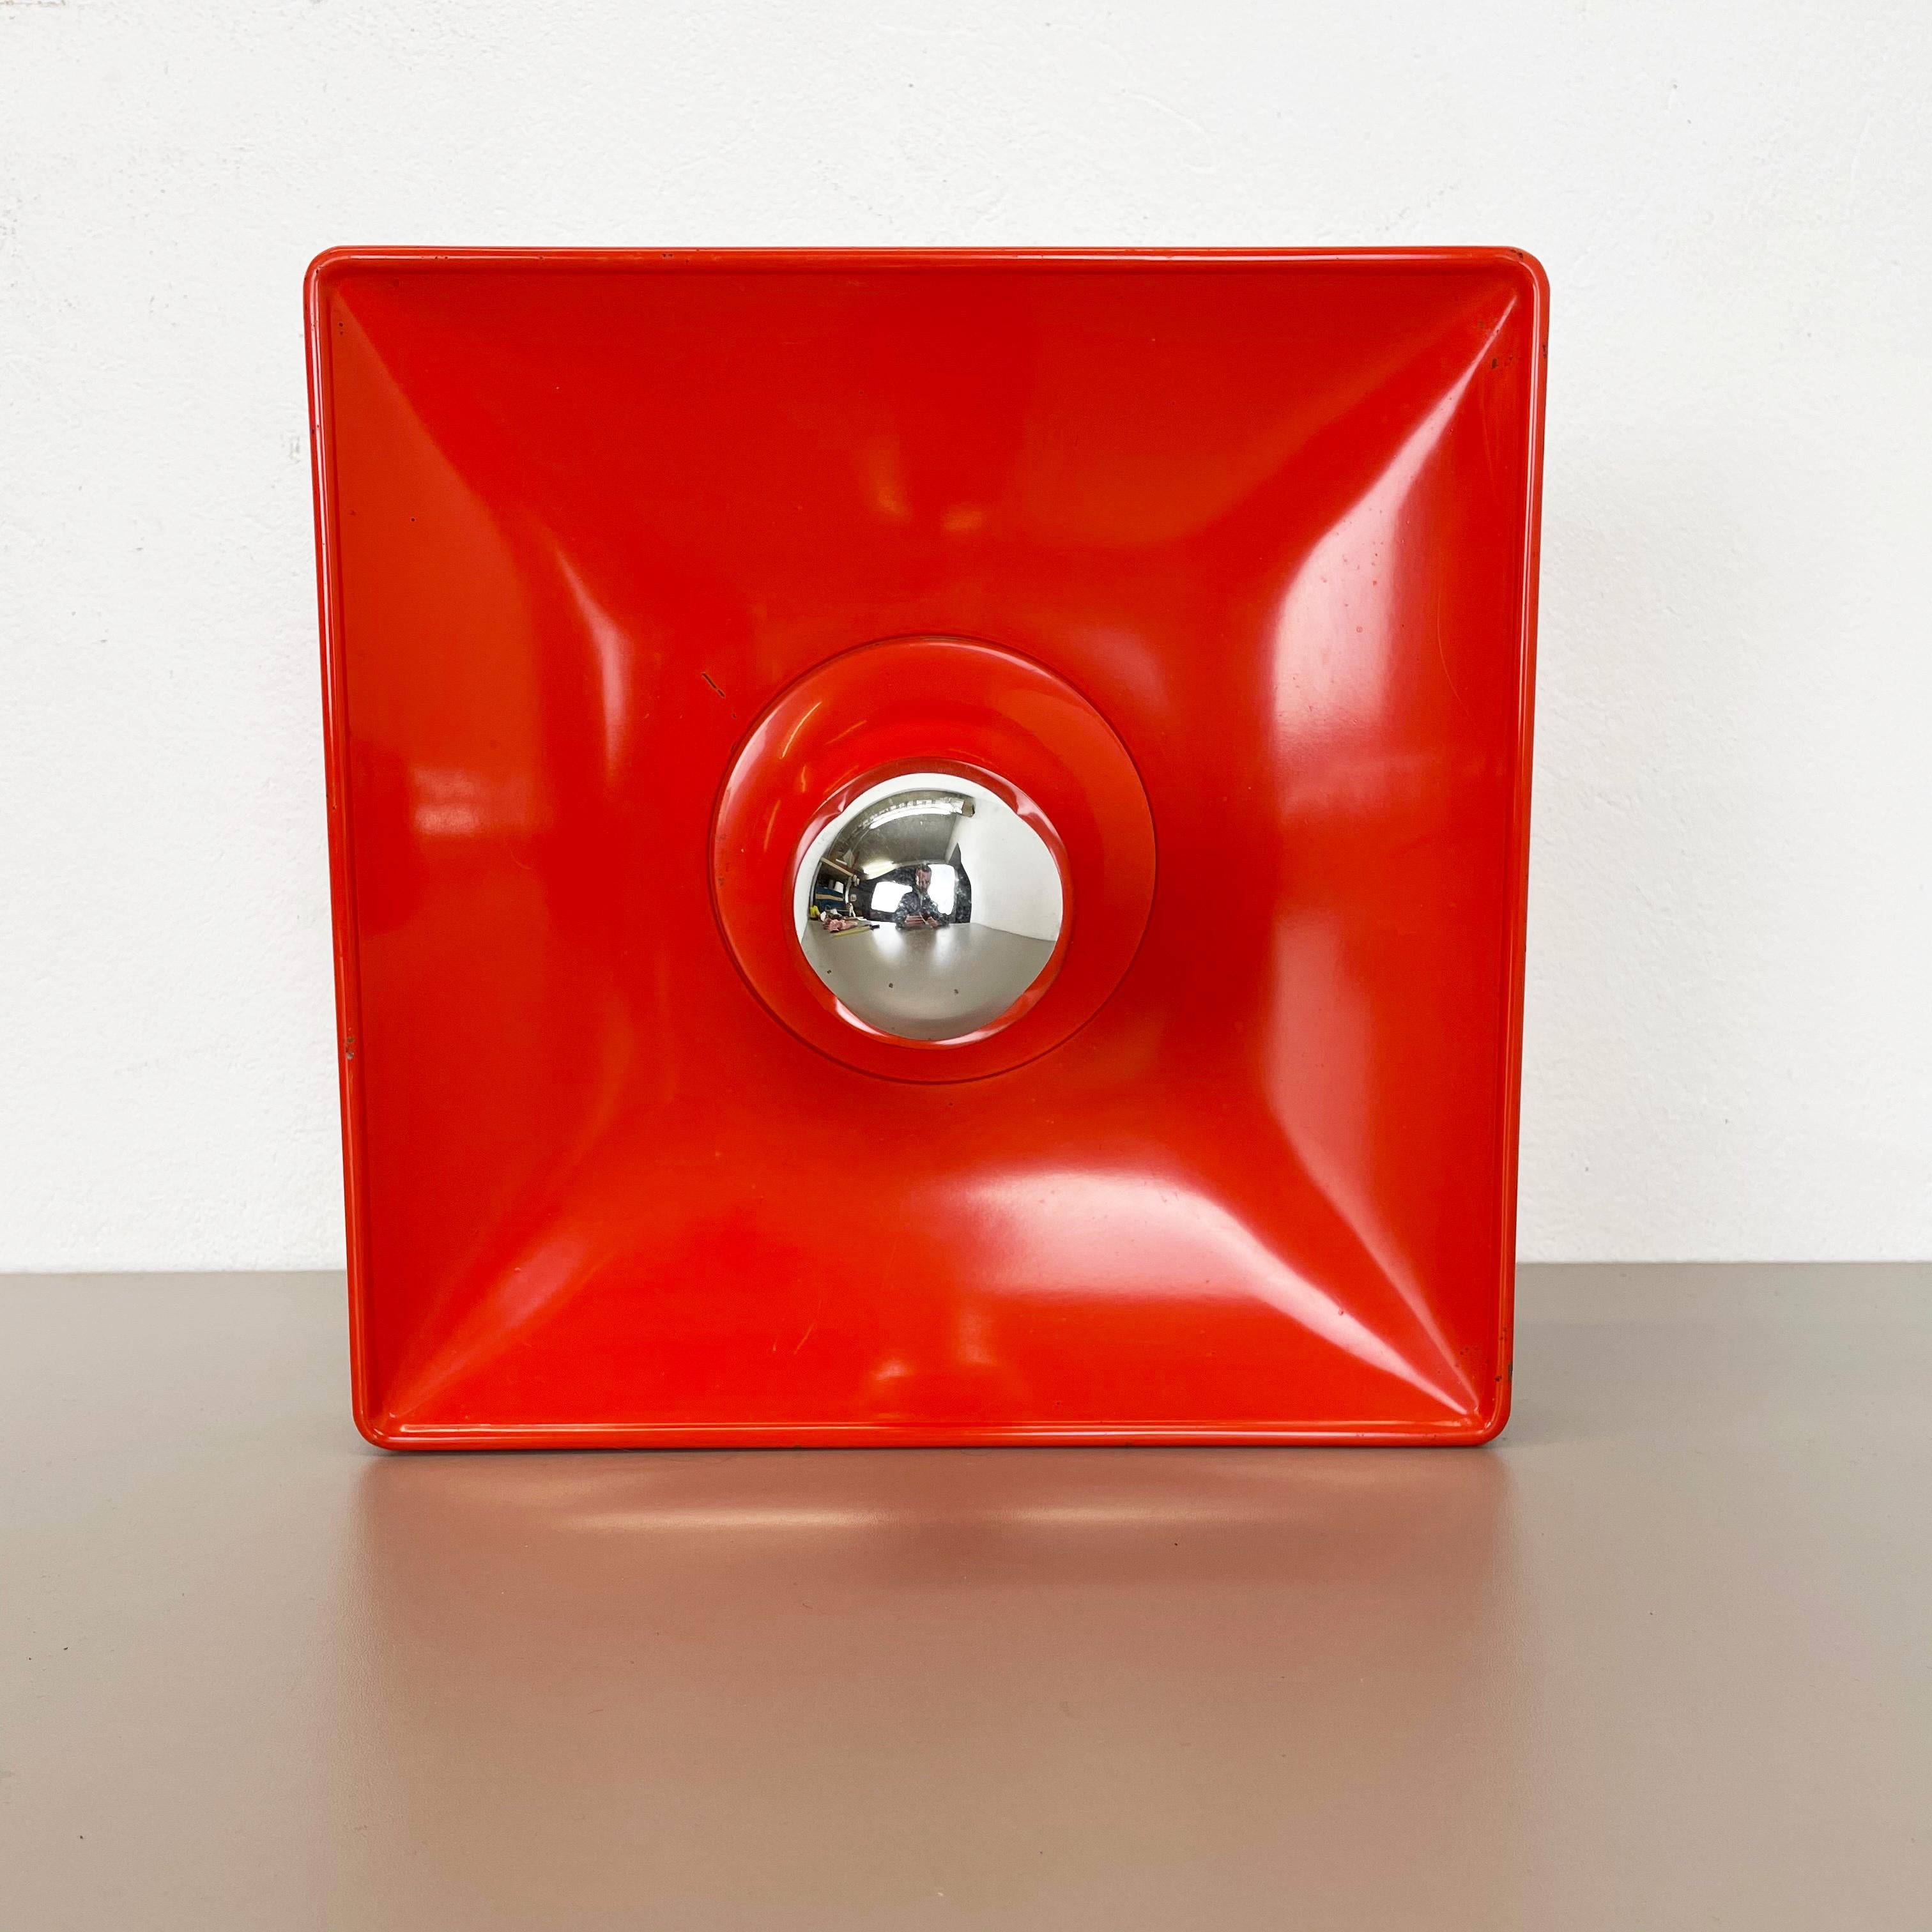 Article:

Wall light


Producer:

Sölken Lights, Germany


Origin:

Germany



Age:

1970s



An original red-orange wall light designed and produced by Sölken Leuchten in Germany in the 1970s. This piece is made of solid